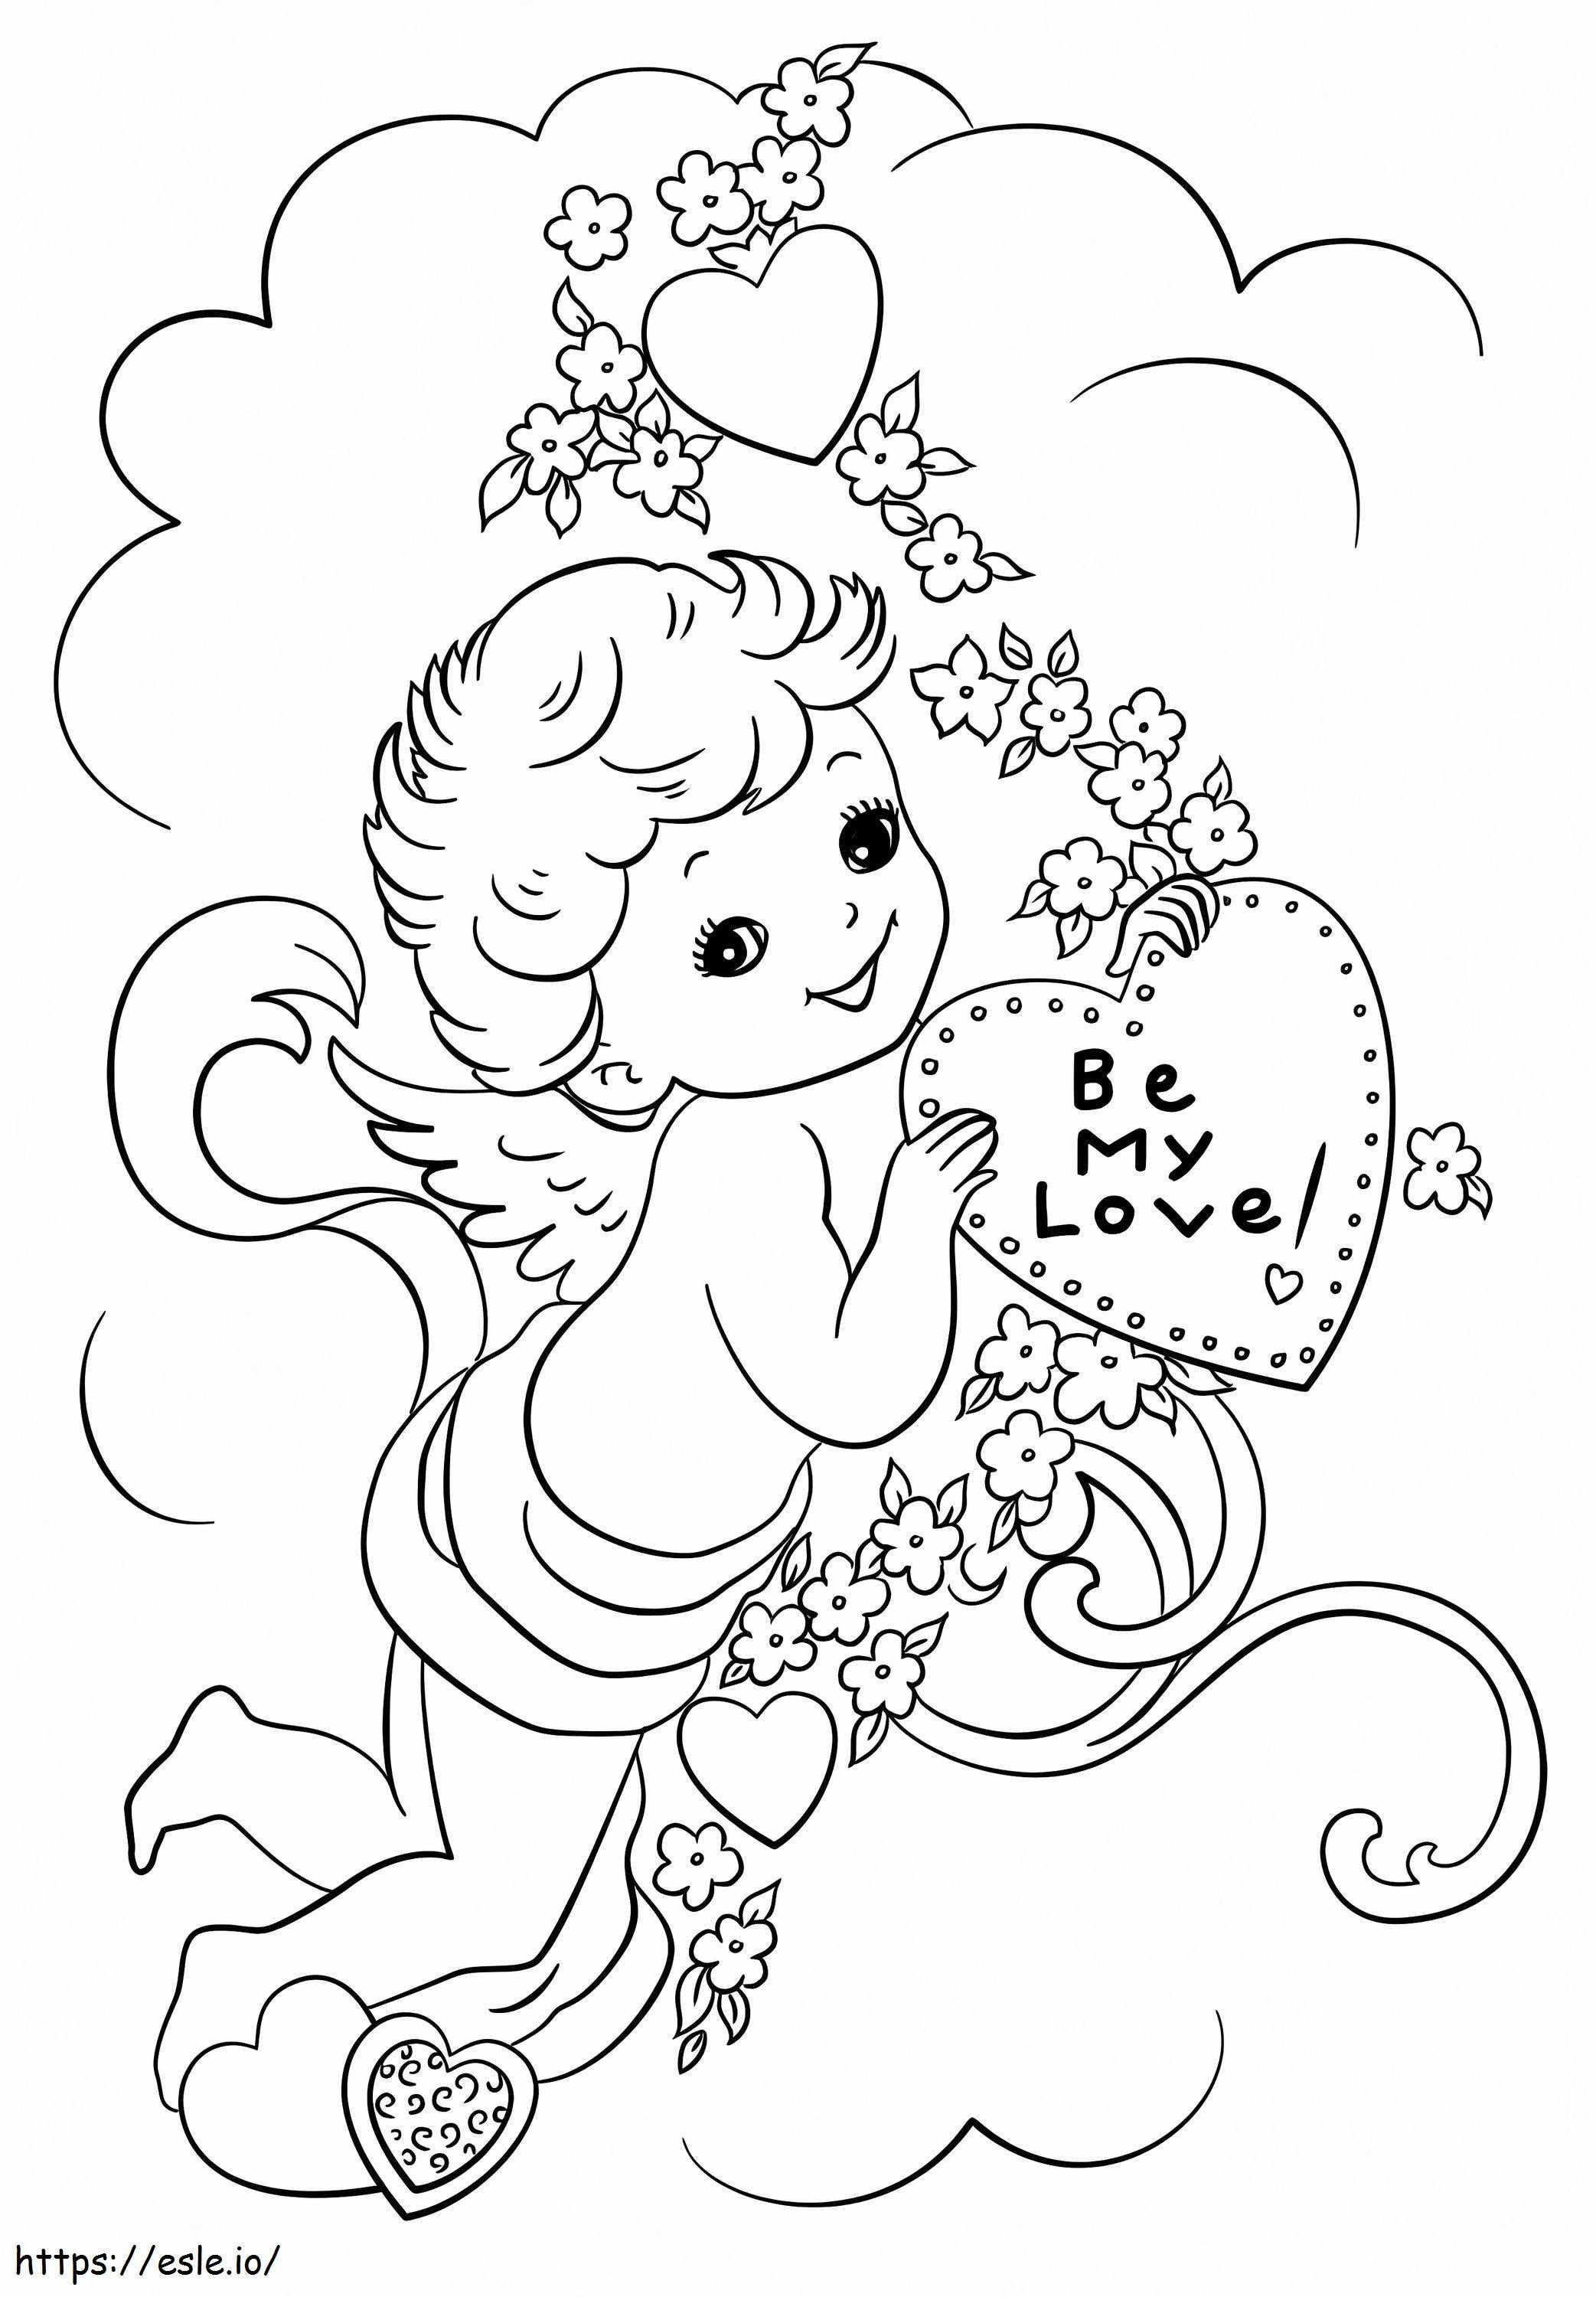 Be My Love coloring page